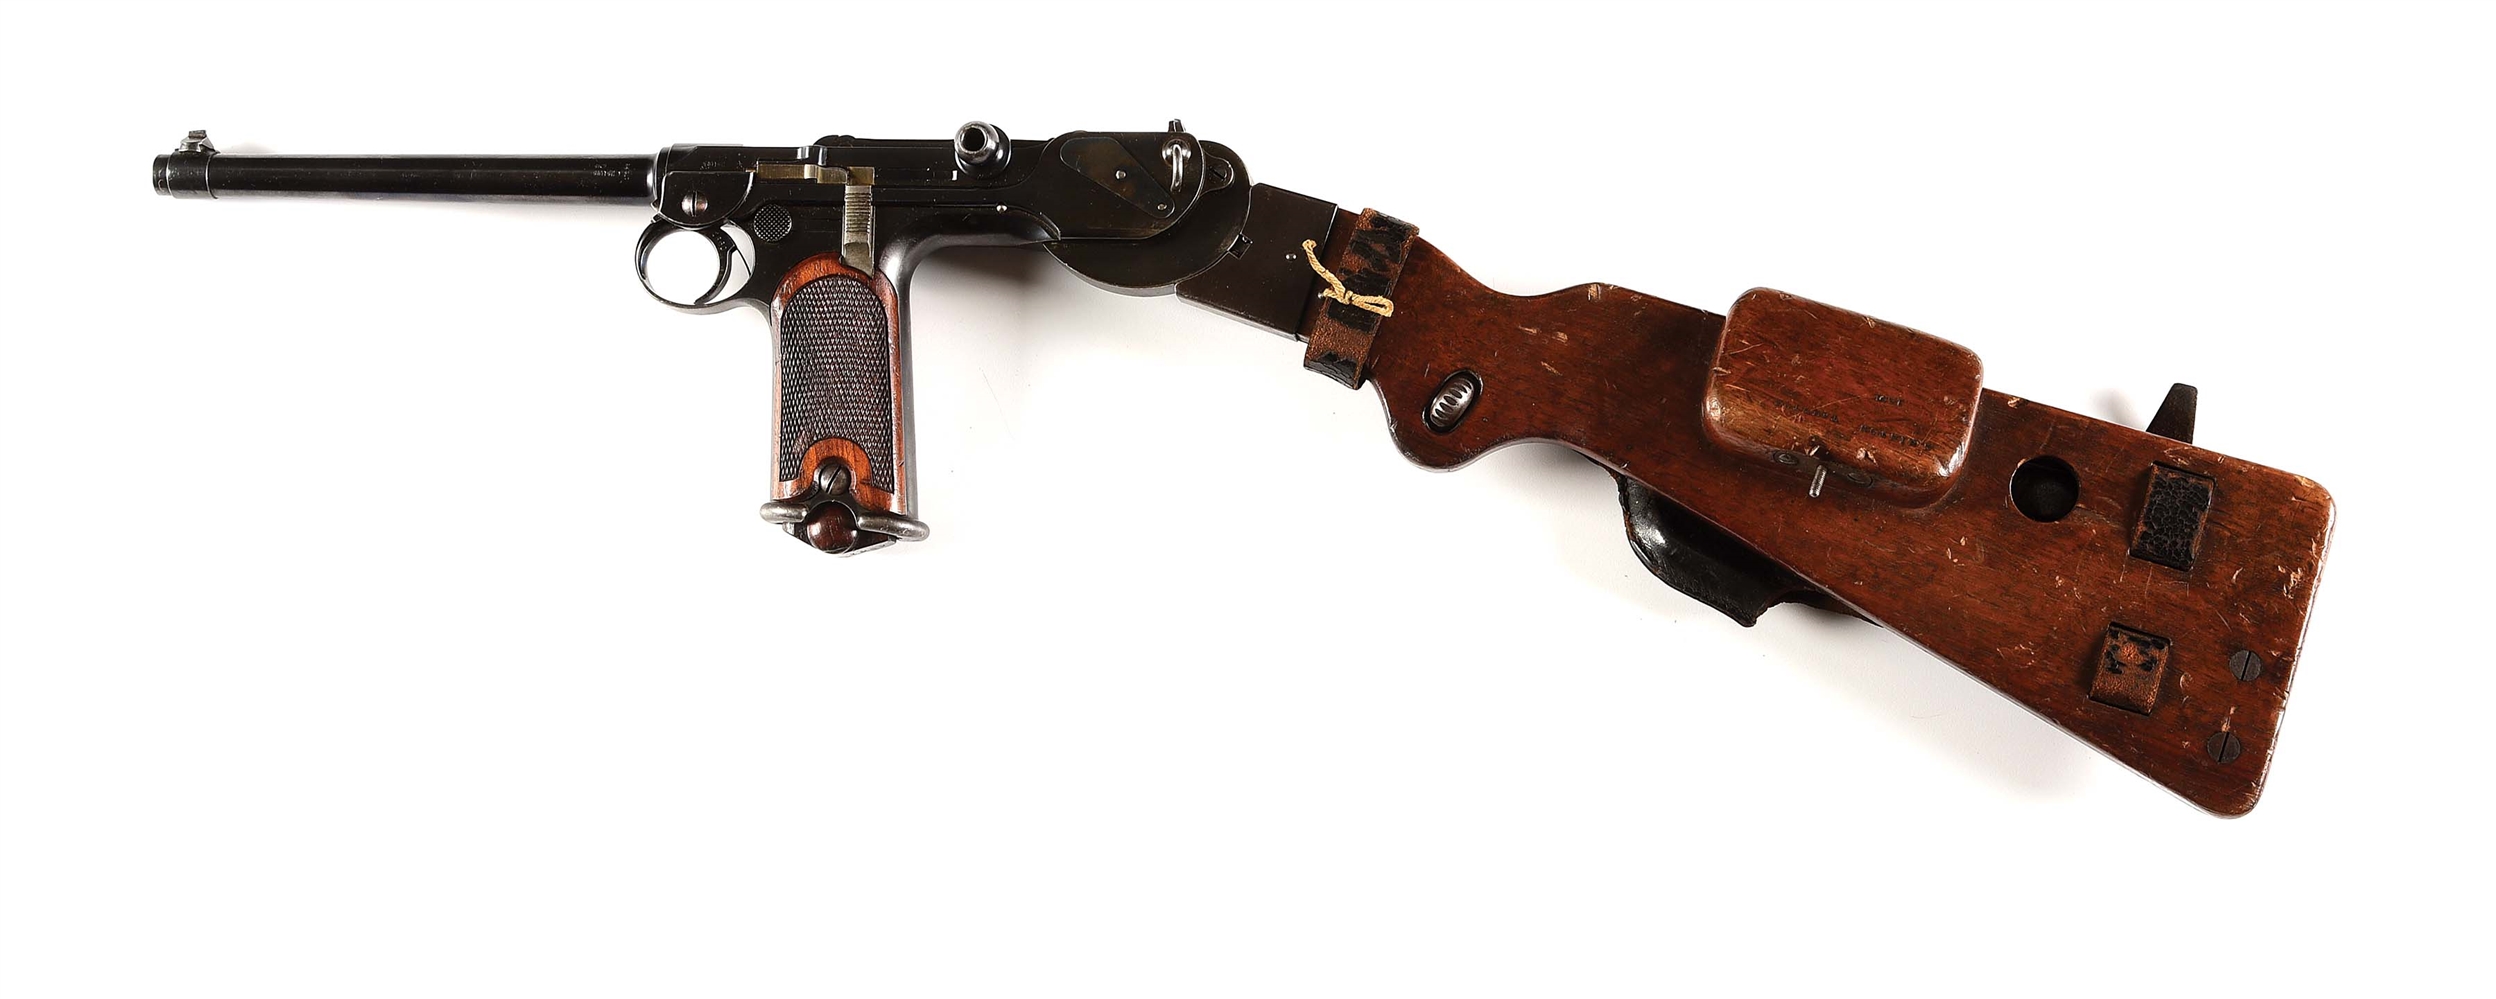 (A) DWM MODEL 1893 BORCHARDT PISTOL WITH STOCK AND HOLSTER.